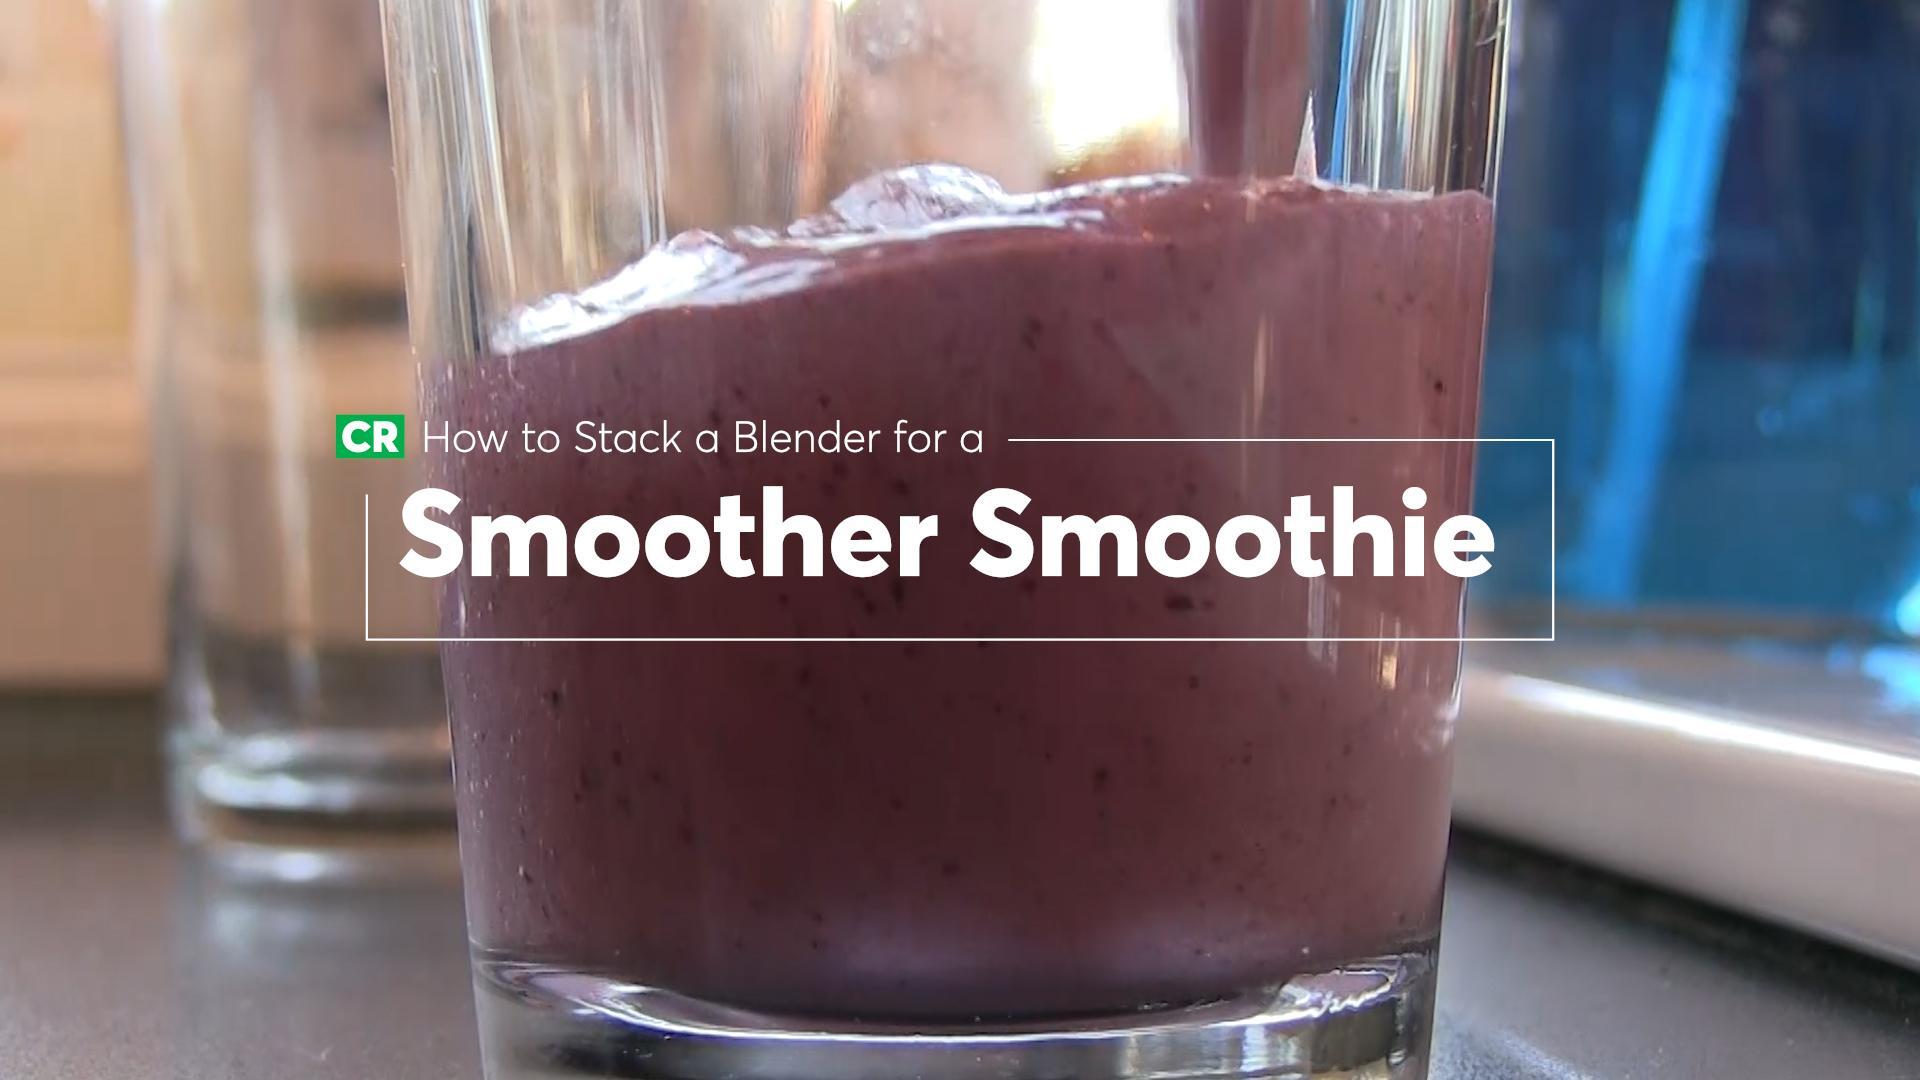 Calling all smoothie makers! Blend without disrupting your whole